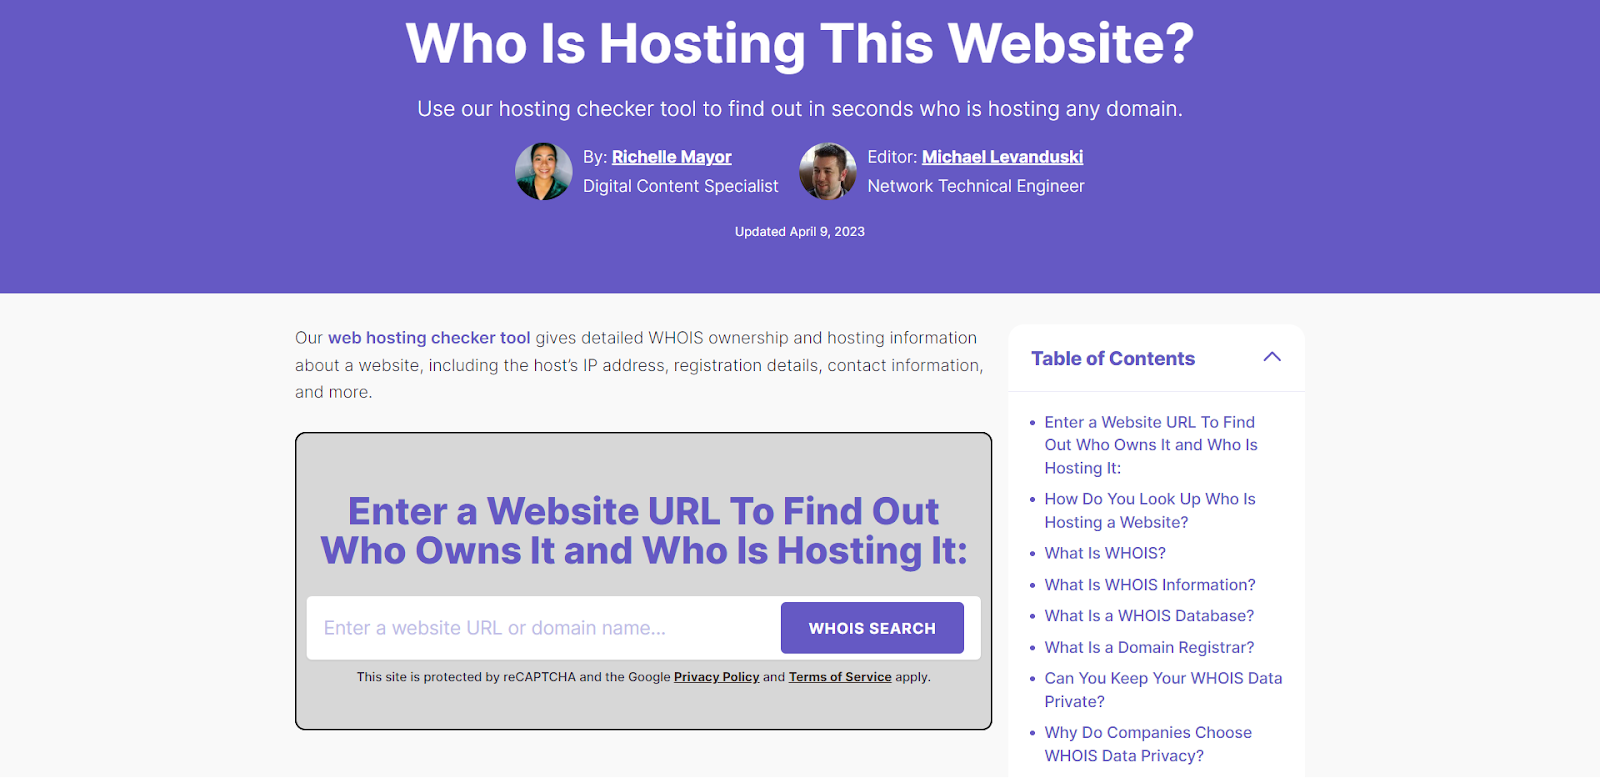 Utilize tools like "Who Is Hosting This Website?"